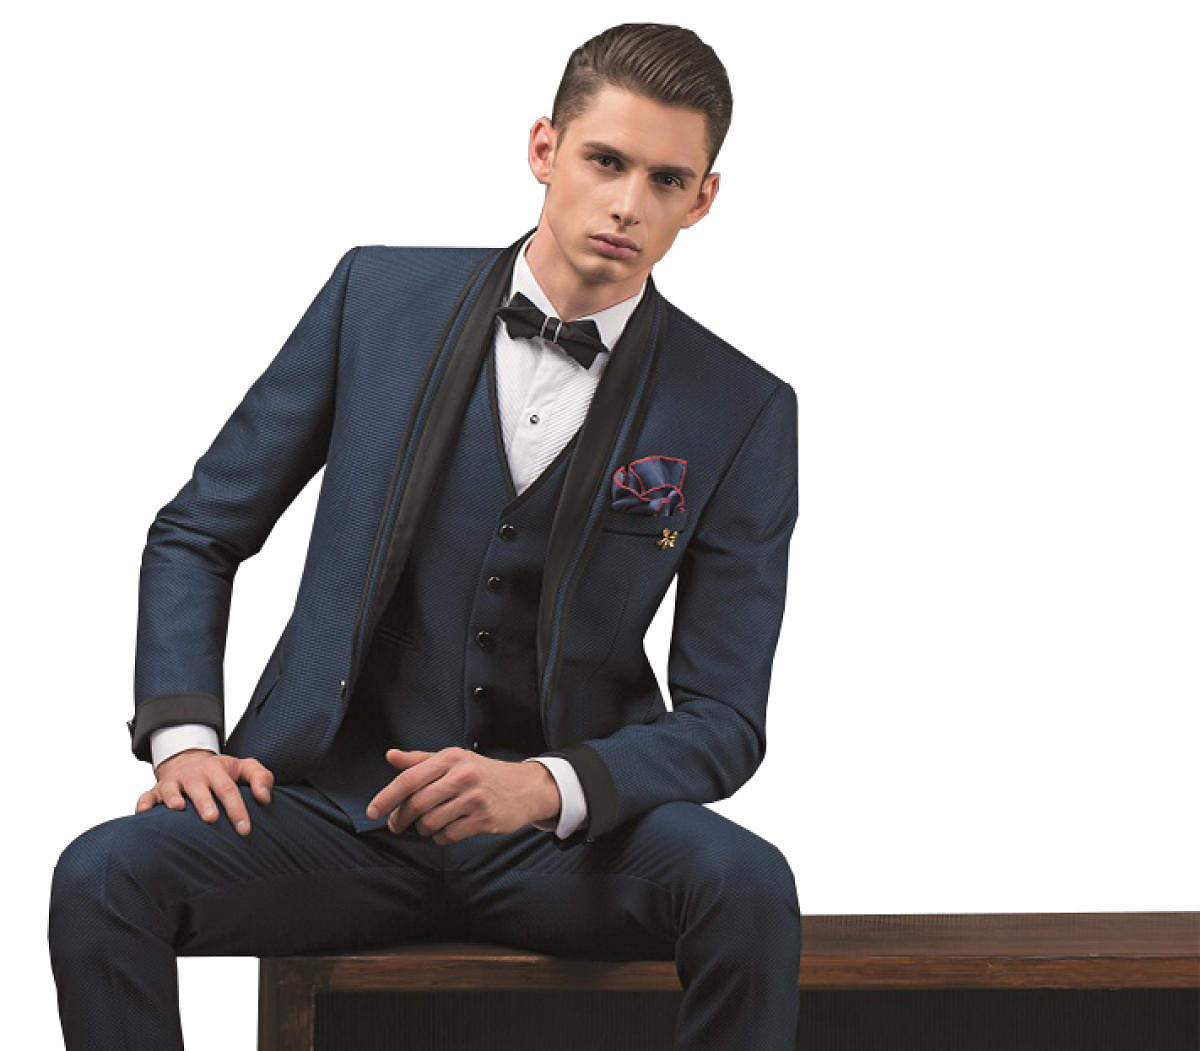 The uber cool men prefer the tailored look.